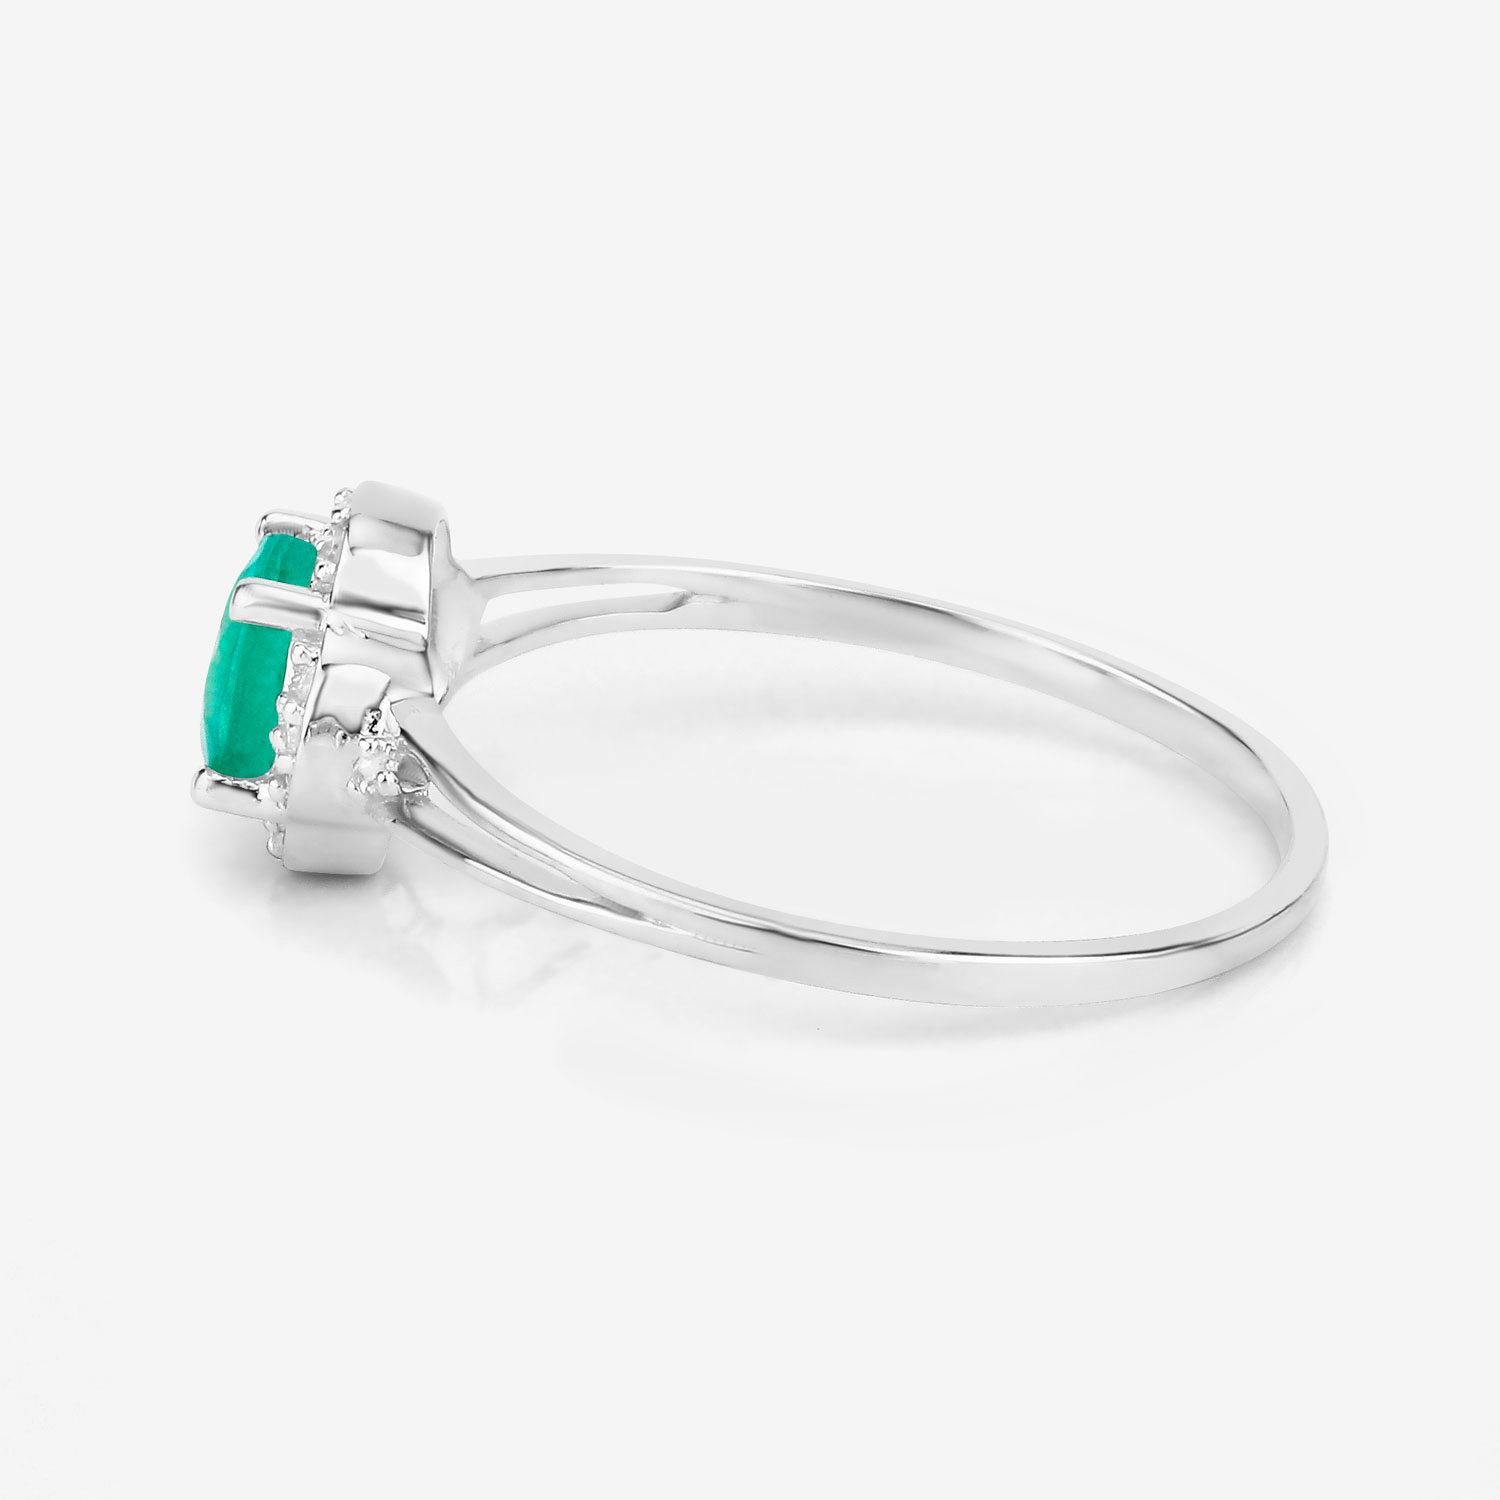 Natural Zambian Emerald Cocktail Ring With Diamonds 0.50 Carats 14K White Gold In Excellent Condition For Sale In Laguna Niguel, CA